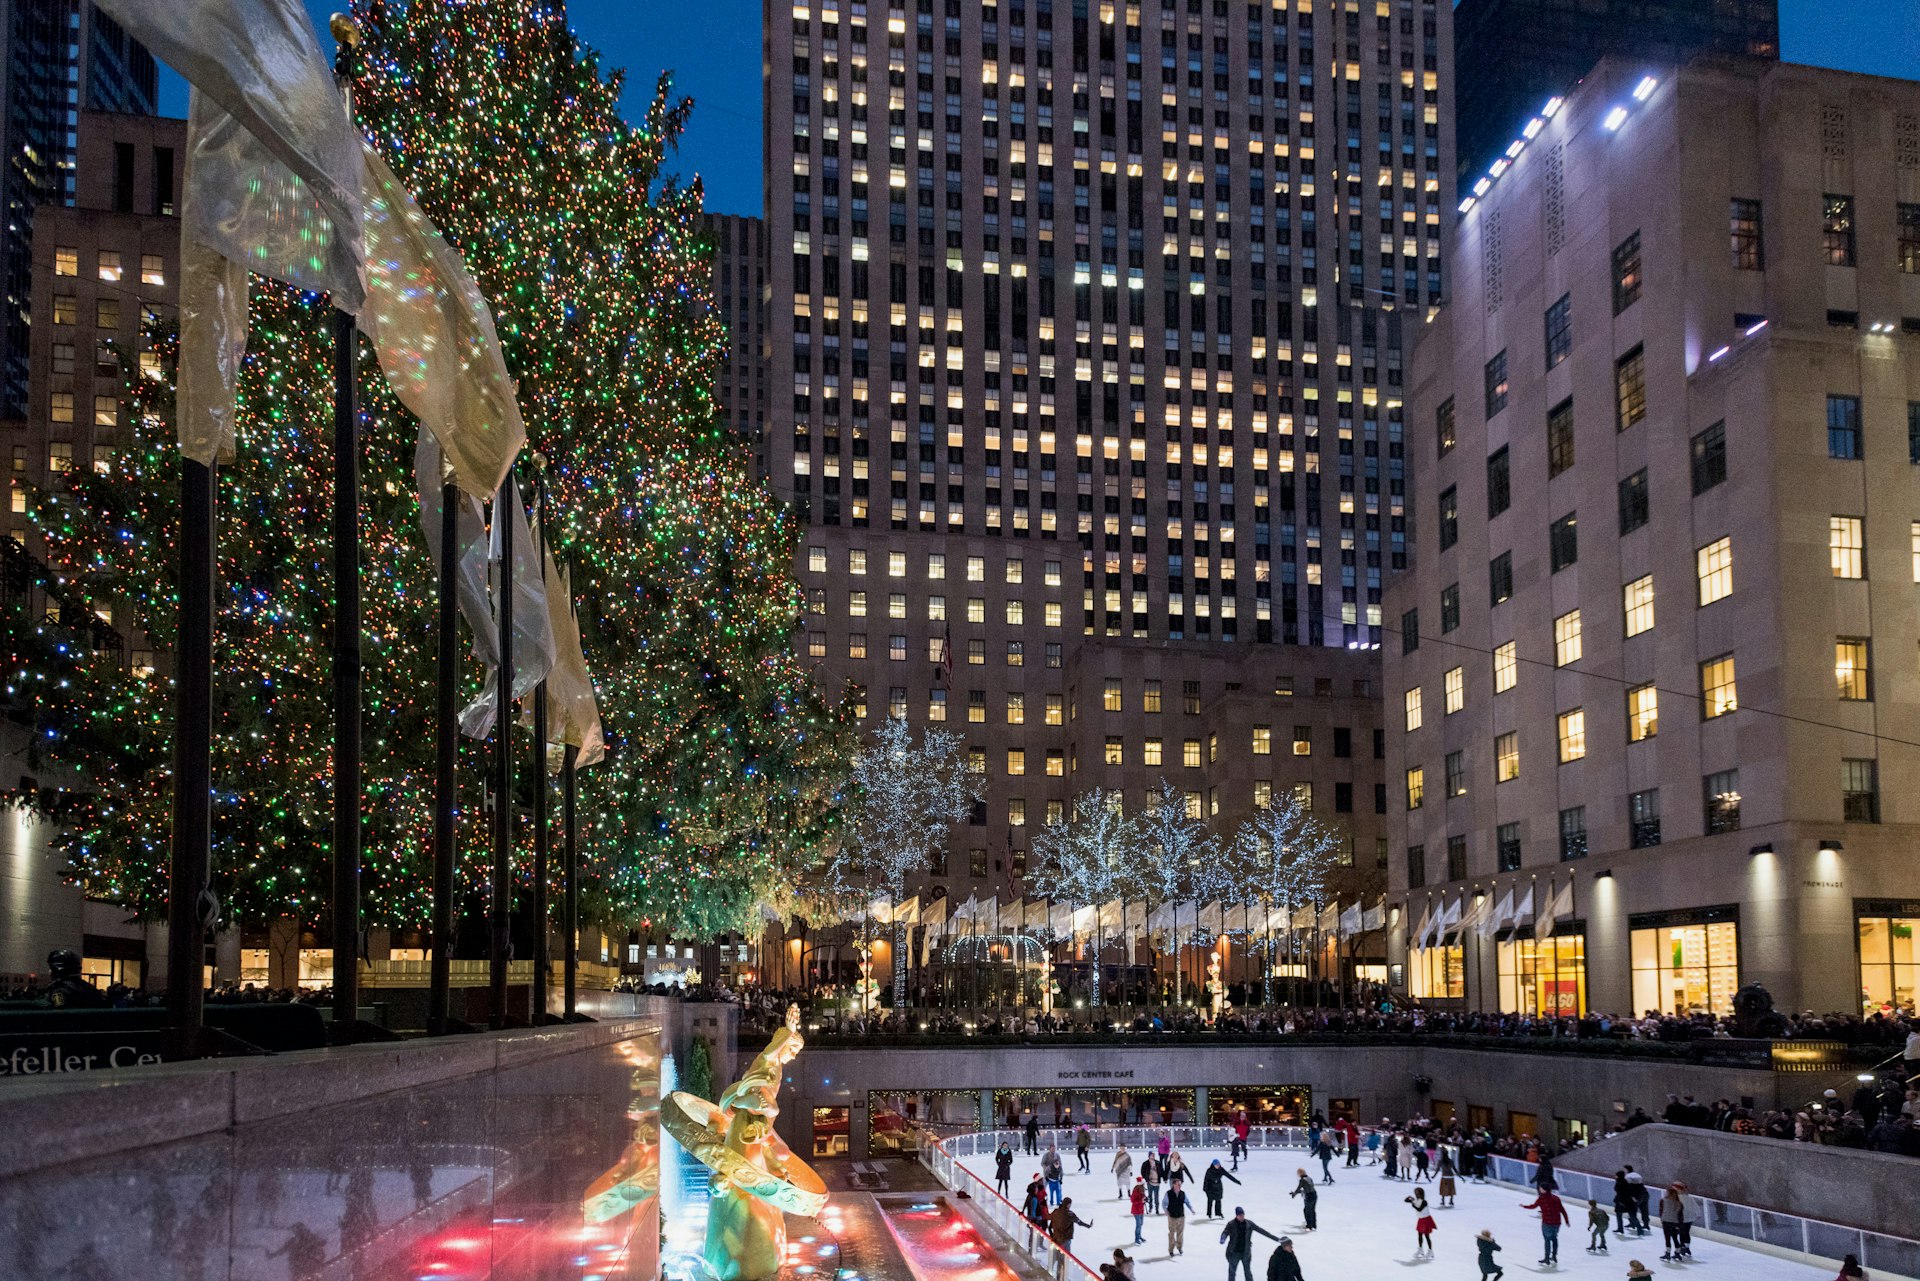 A distant shot of people skating at Rockefeller Center with the Christmas tree in view